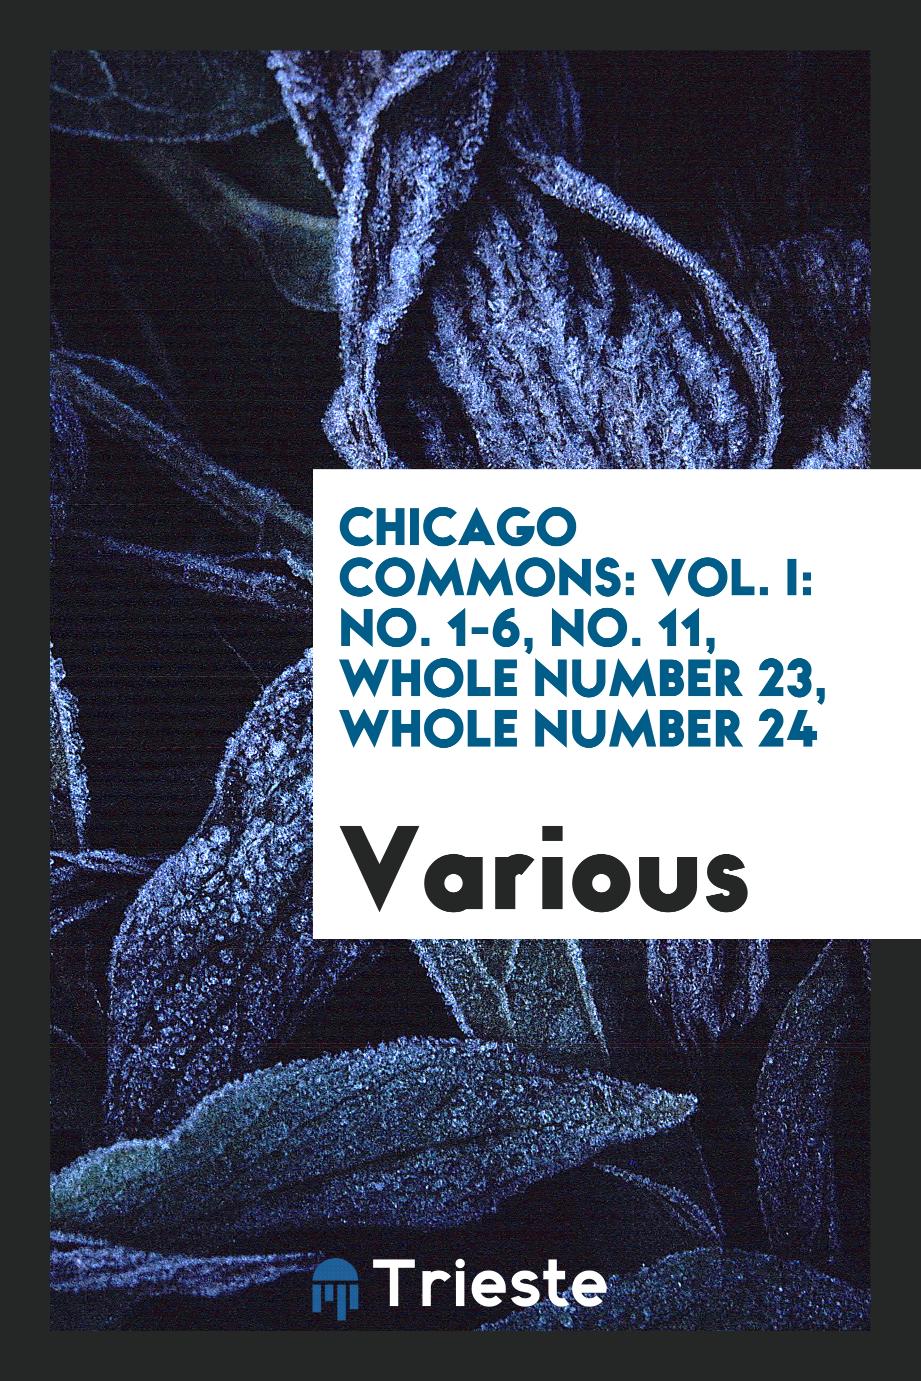 Chicago Commons: Vol. I: No. 1-6, No. 11, Whole Number 23, Whole Number 24